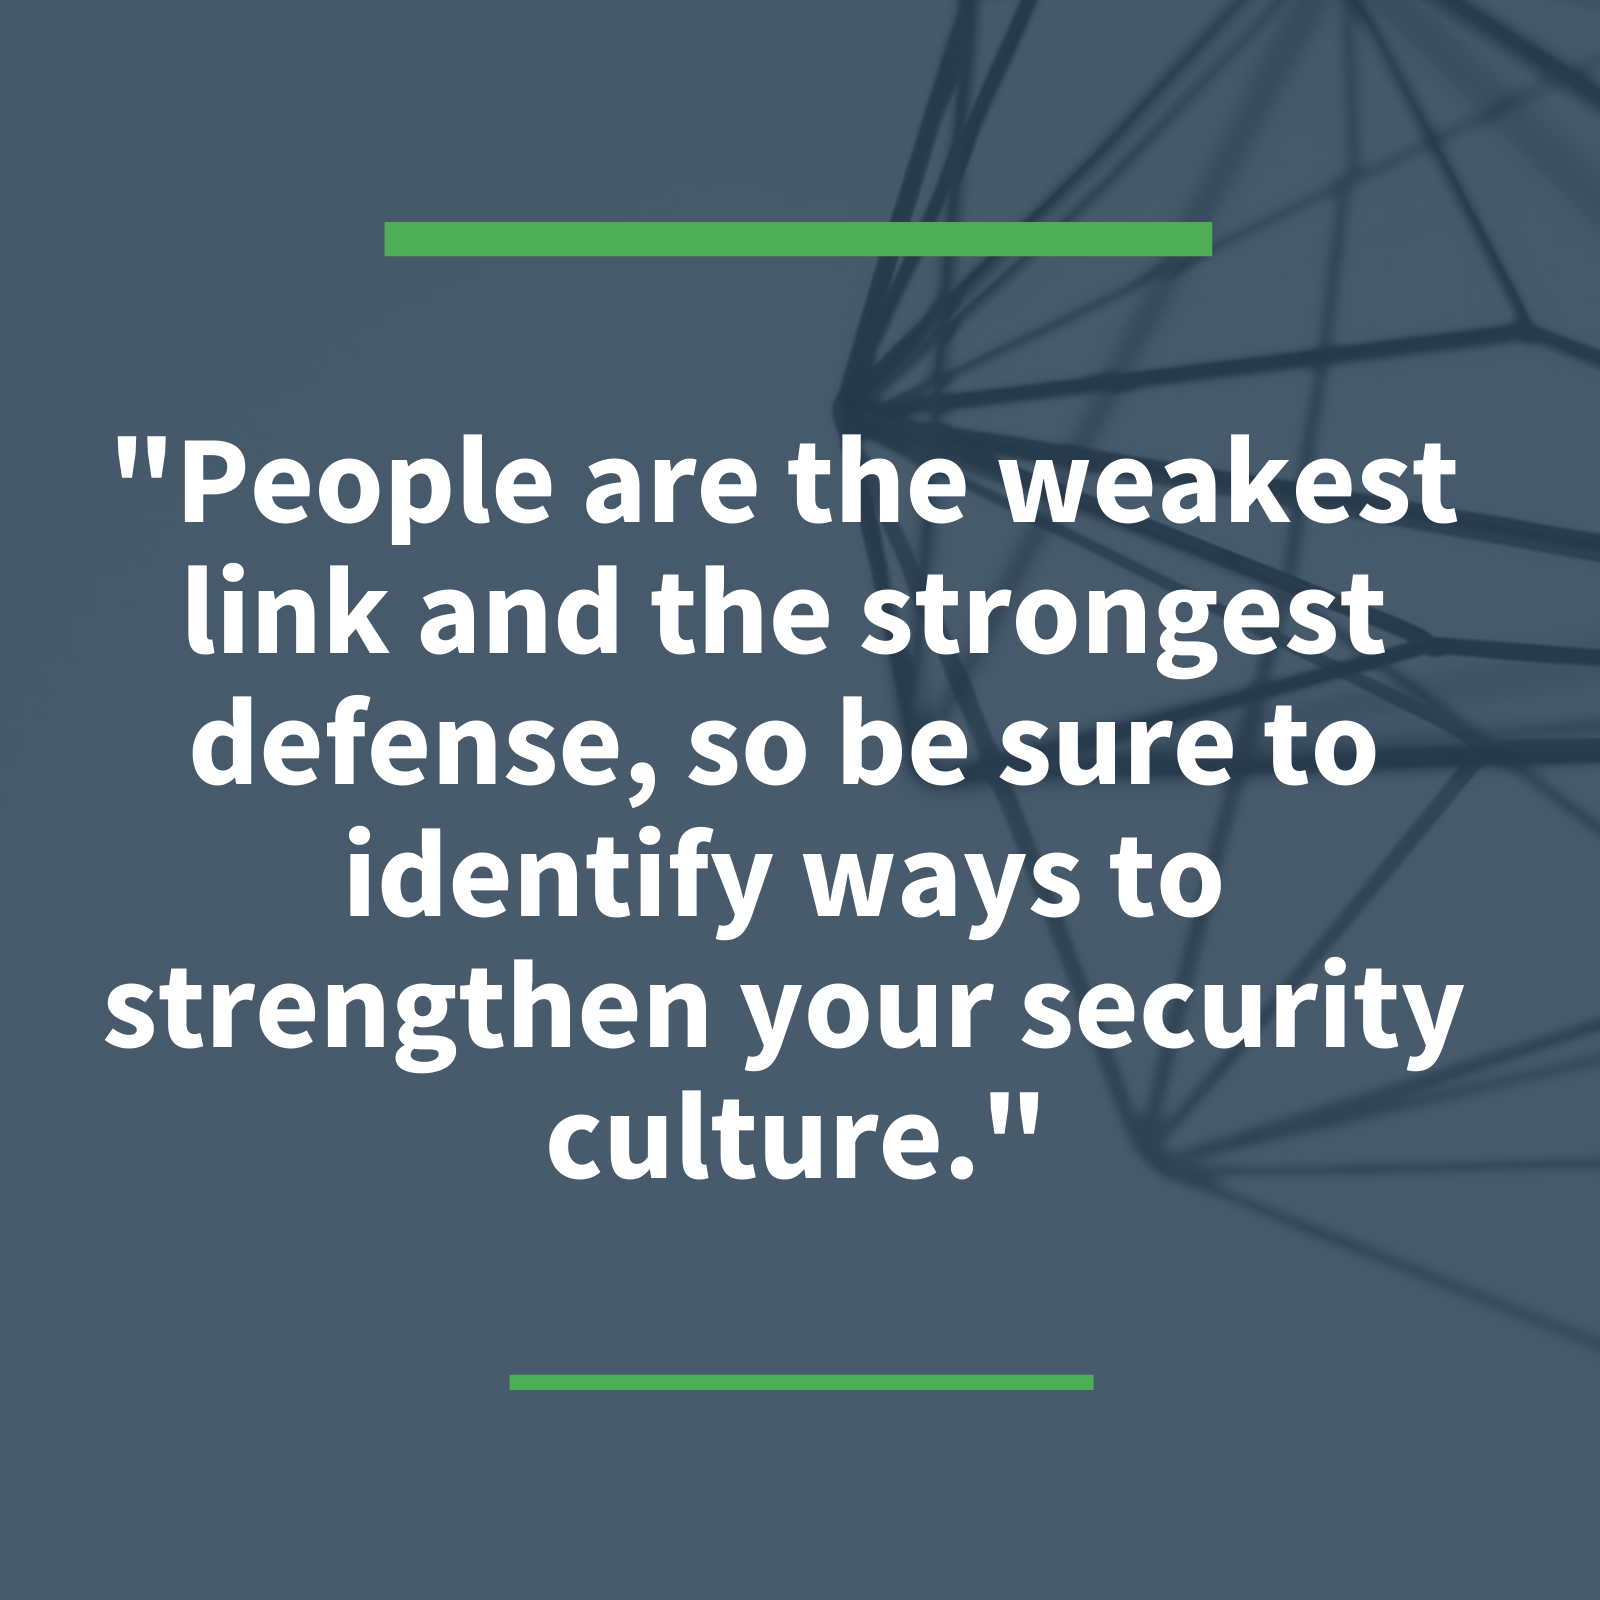 "People are the weakest link and the strongest defense..."